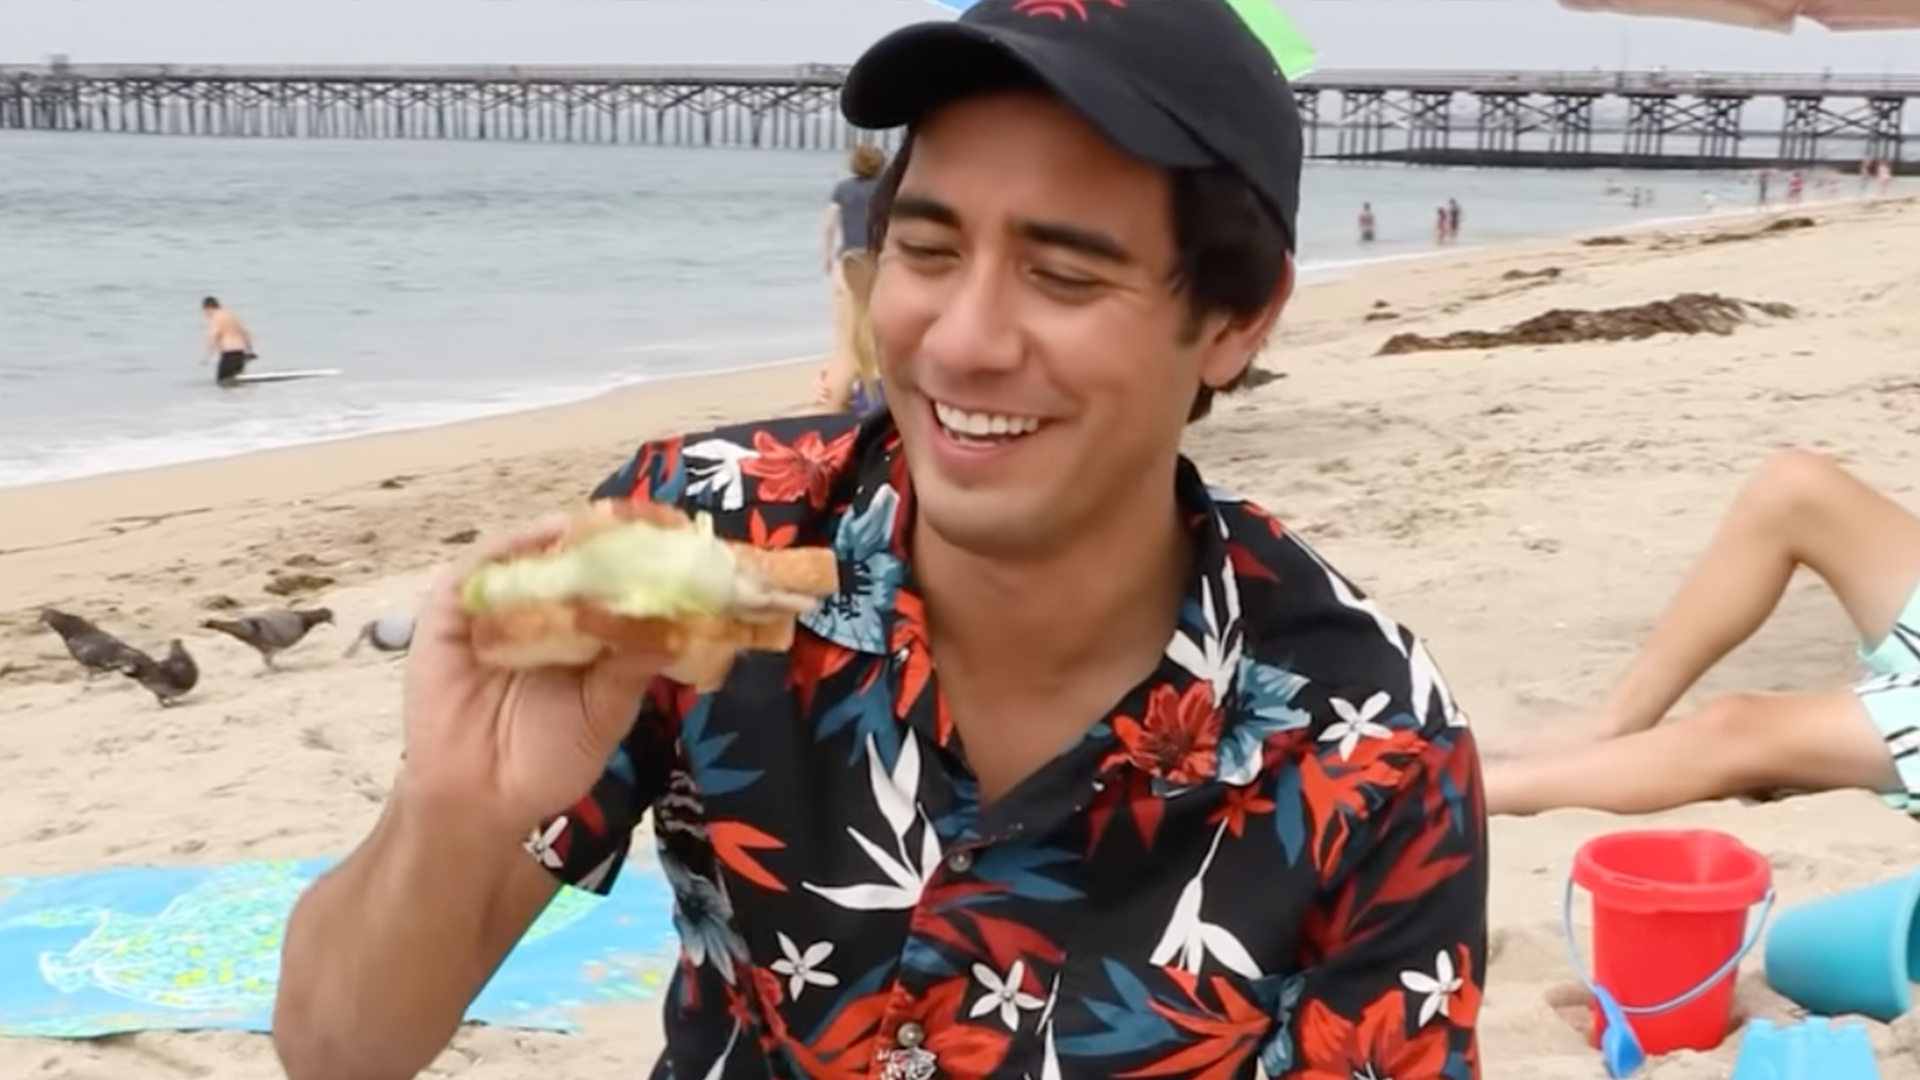 A clip from one of Zach King's amazing video clips